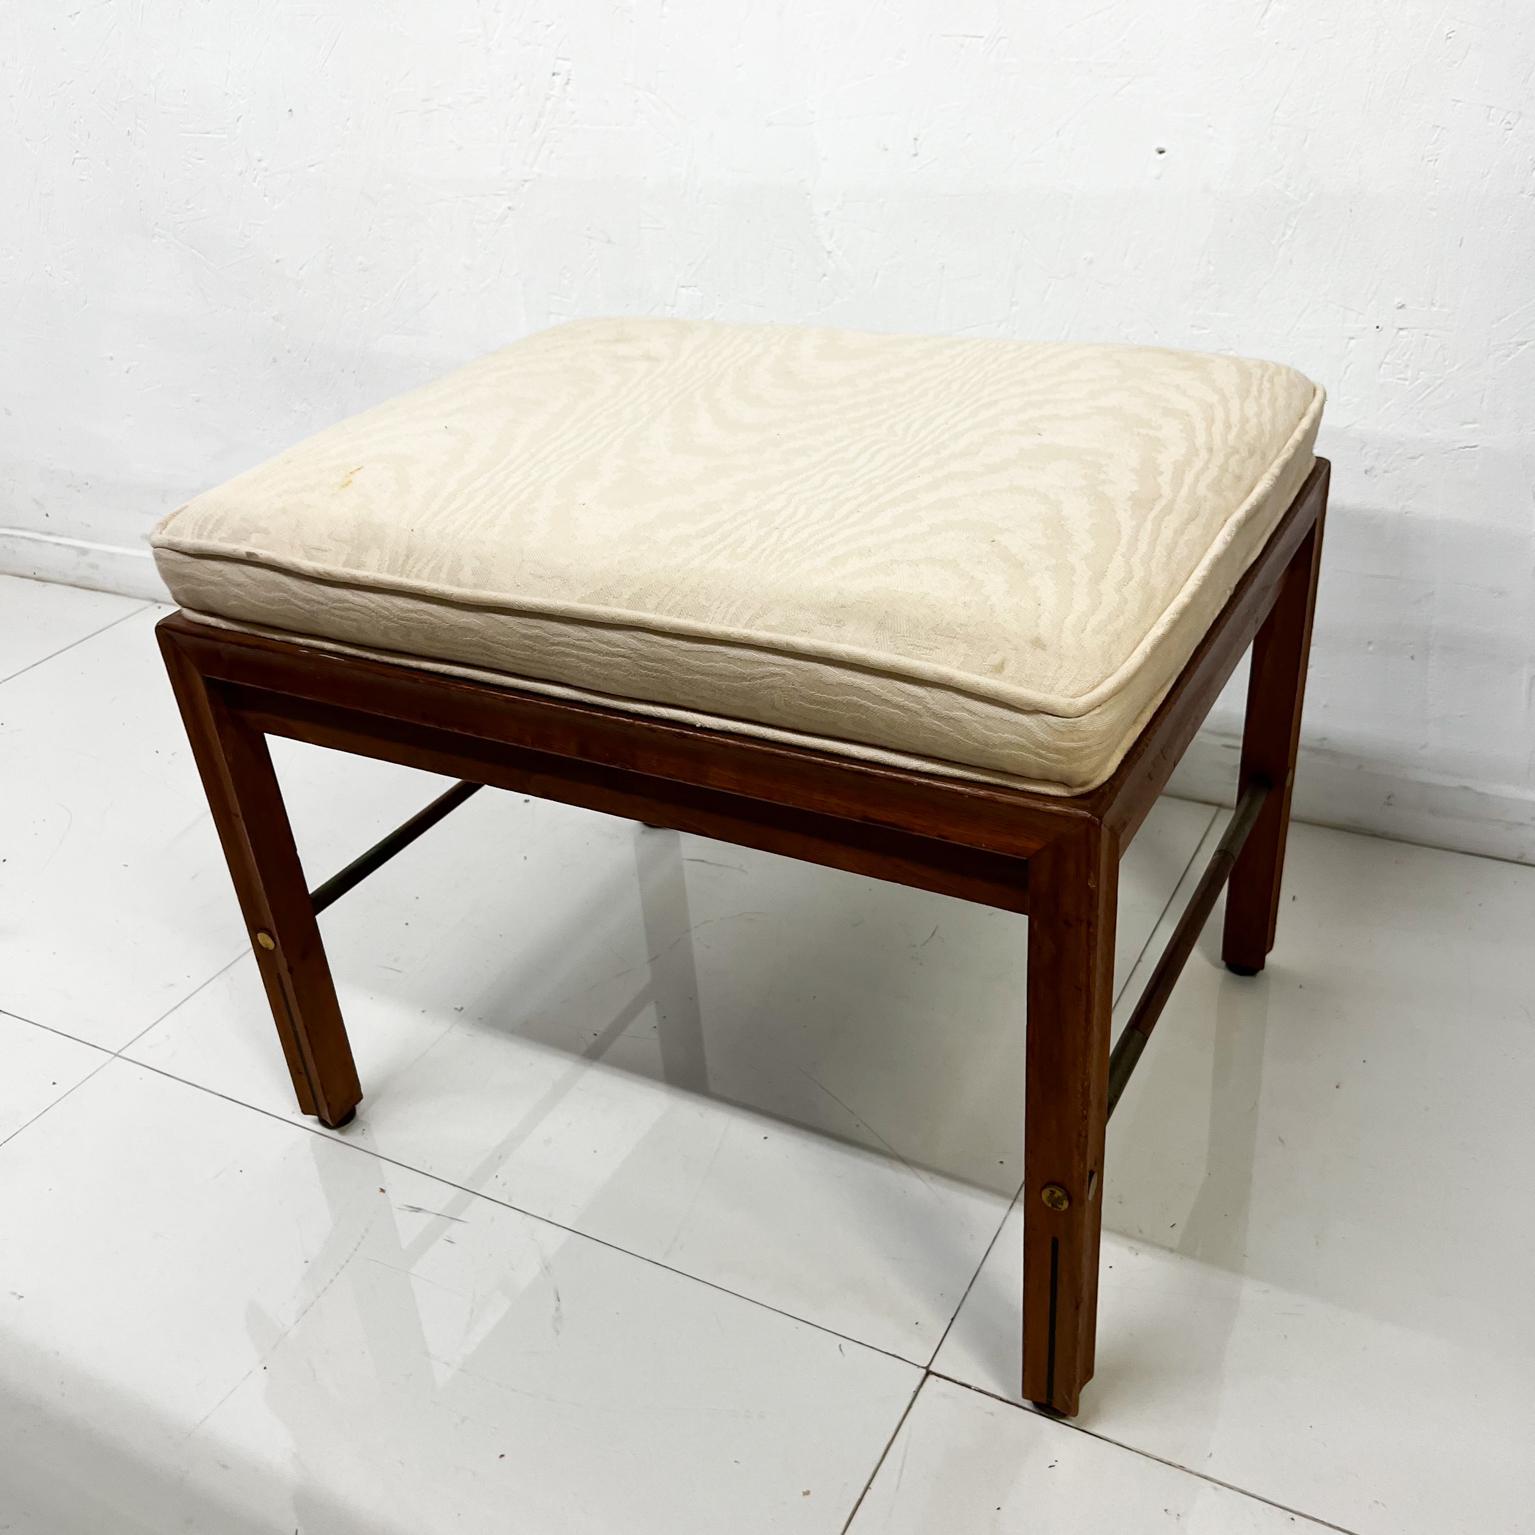 1960s Vintage Crown City Table Co Stool Upholstered Bench
City of Industry CA
20 x 16 x 16.5 tall
Preowned vintage unrestored condition.
Refer to images provided.

